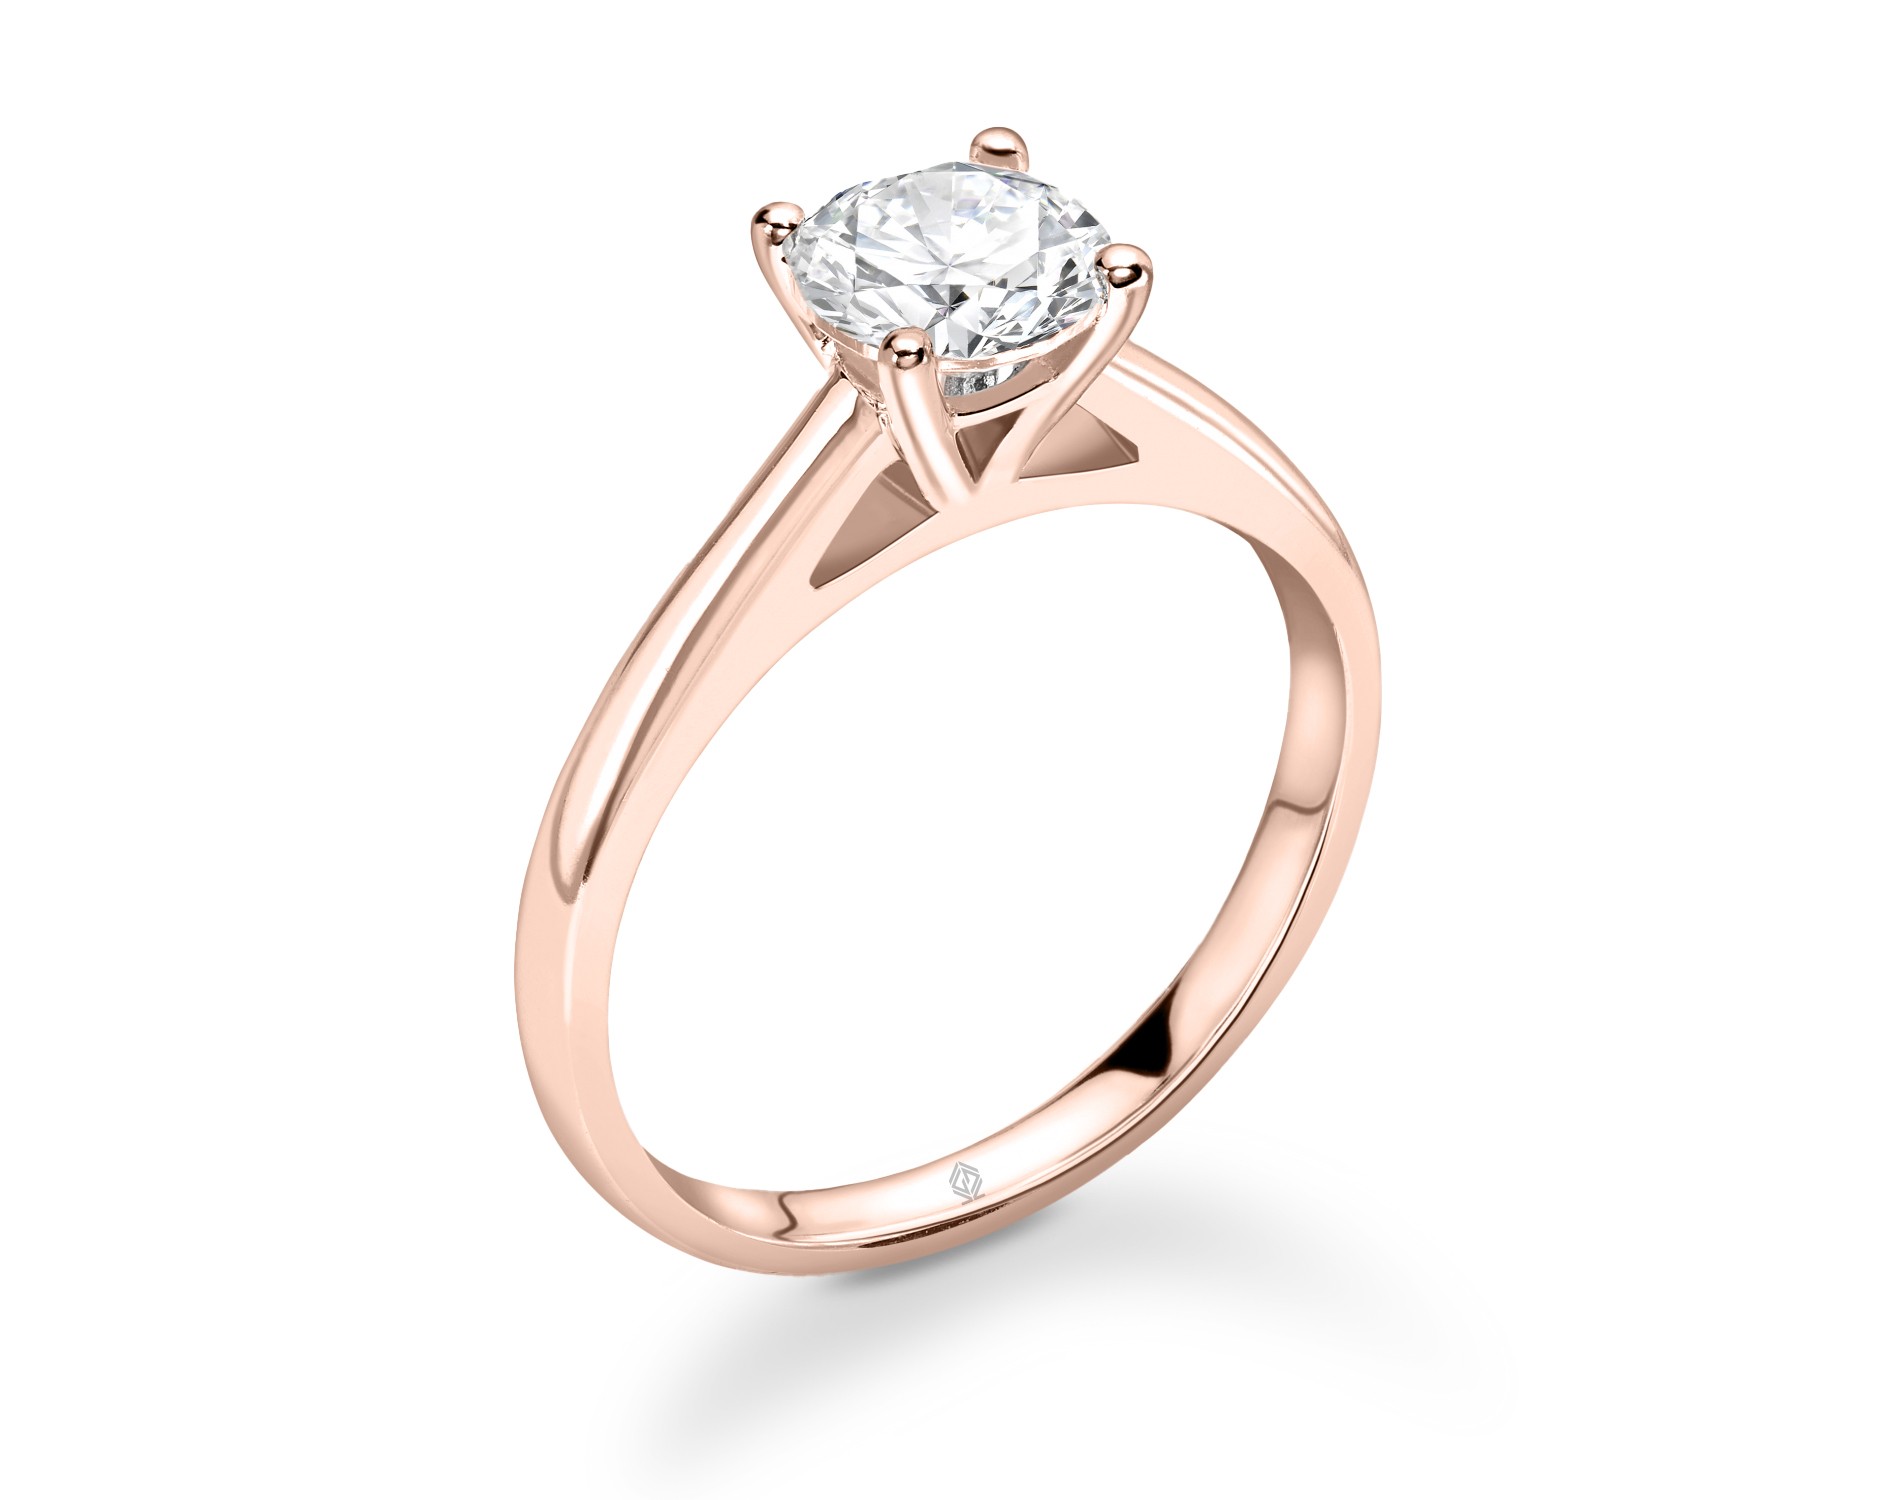 18K ROSE GOLD 4 PRONGS HEAD SOLITAIRE ROUND CUT DIAMOND ENGAGEMENT RING